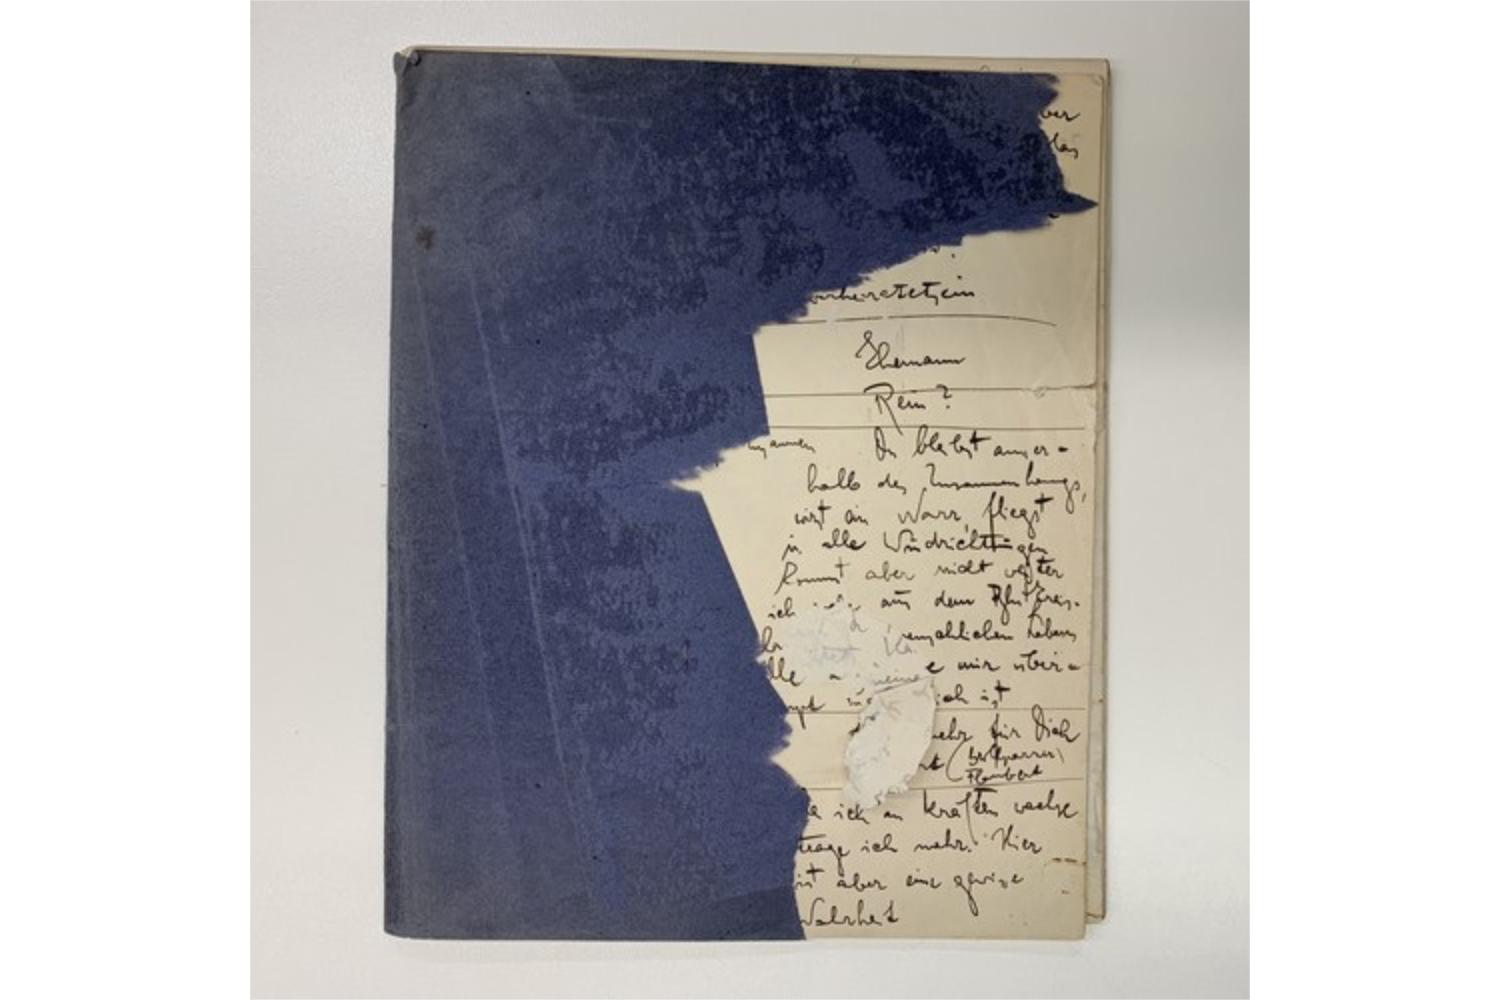  Kafka's Blue Notebook, featuring a list of Hebrew vocabulary words and their German translations, courtesy of the literary estate of Max Brod © National Library of Israel 